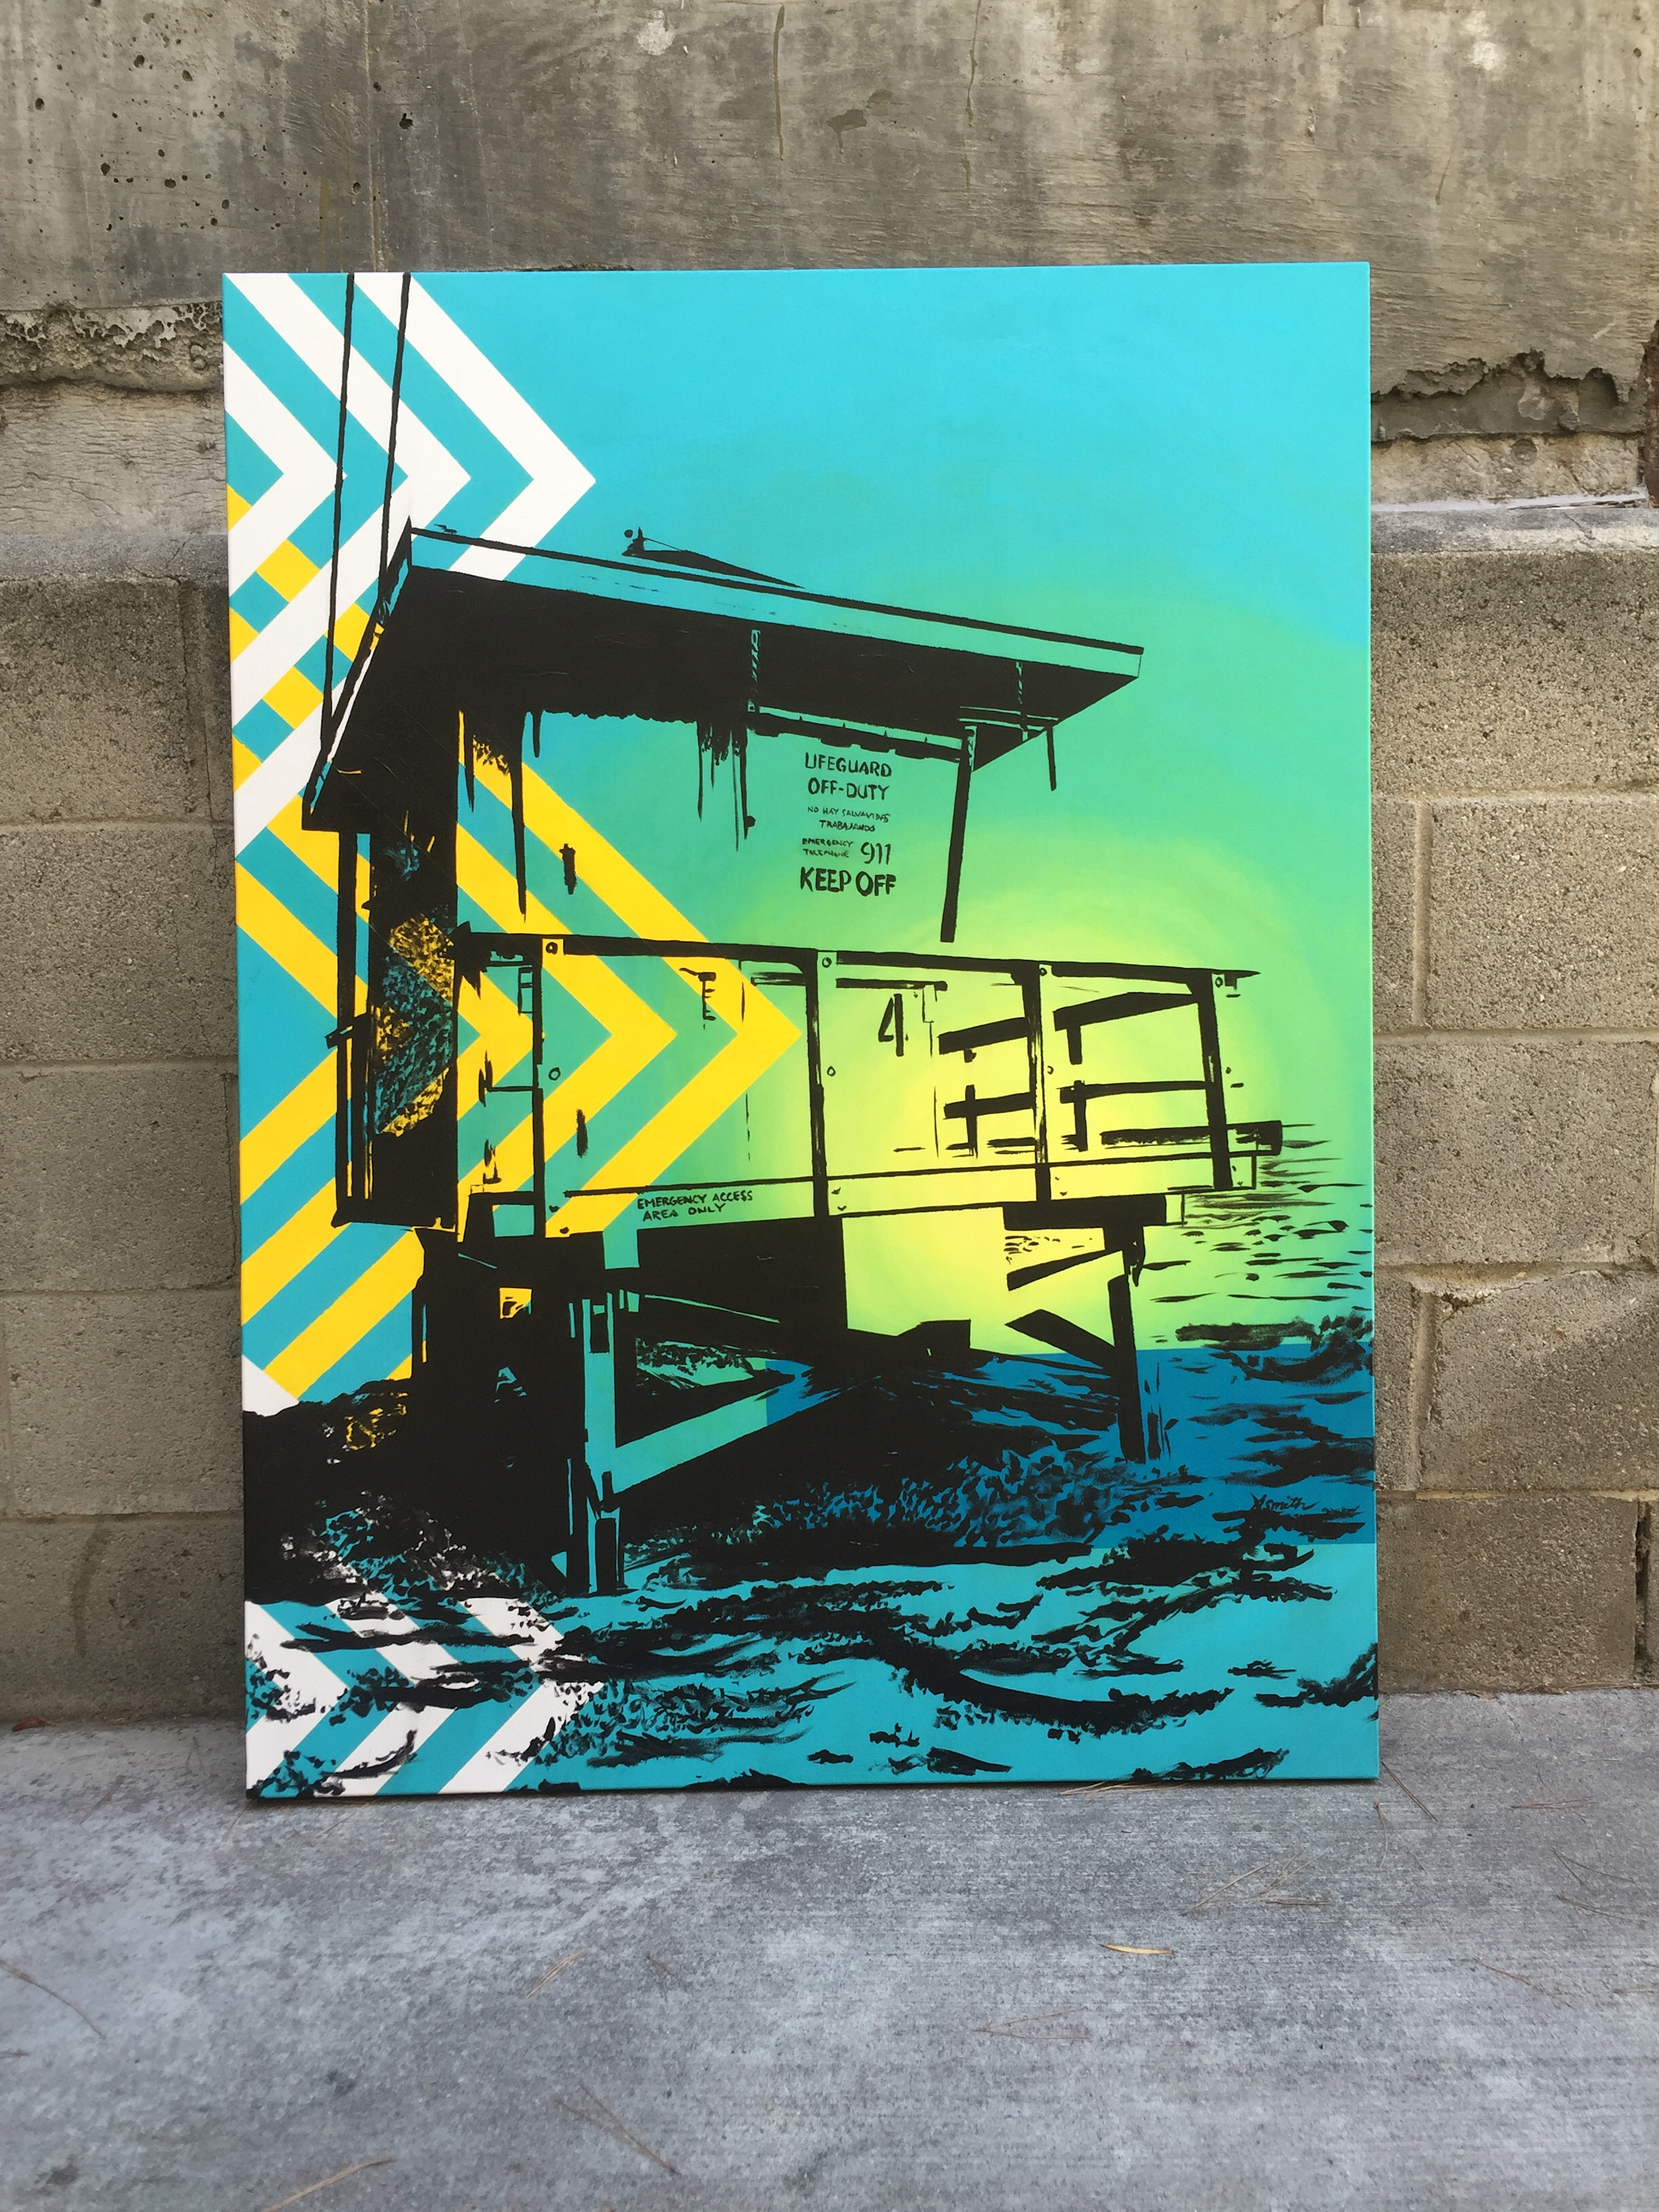 Lifeguard stand to post c9vfxr